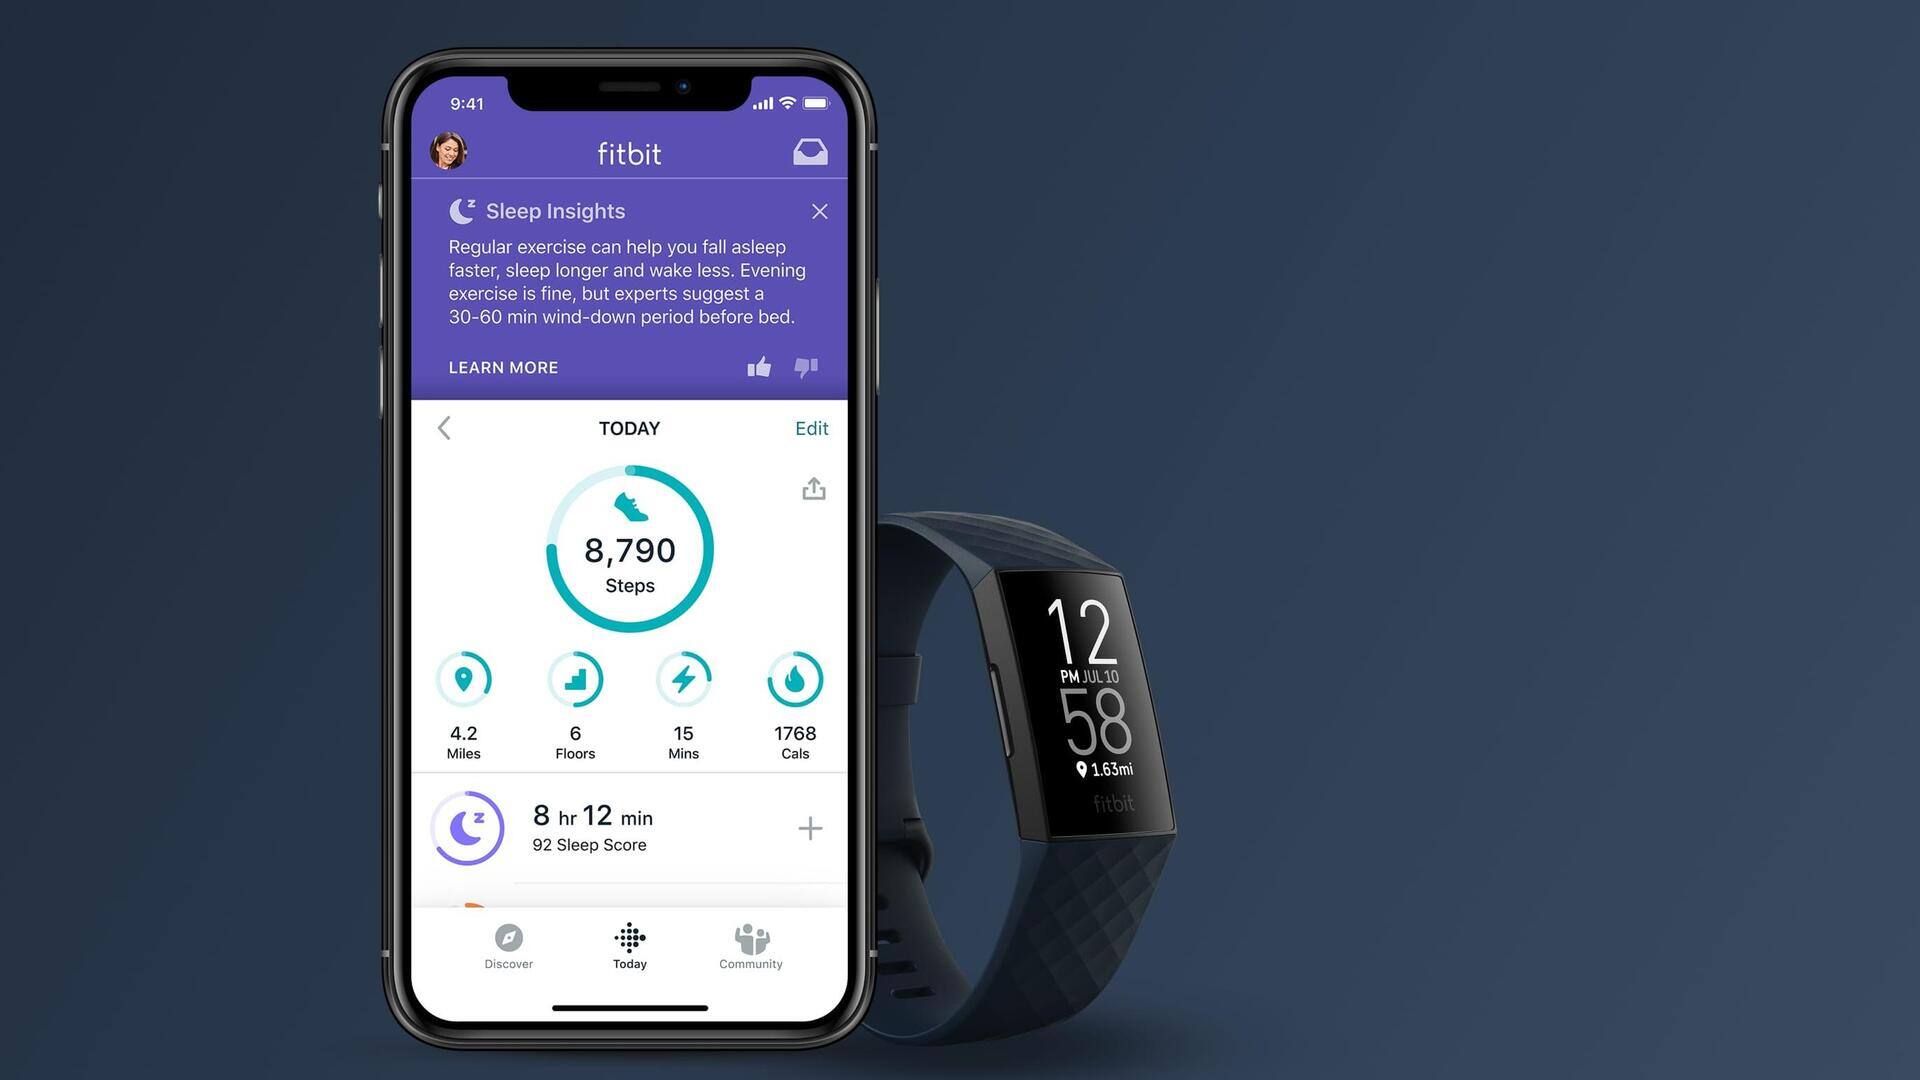 Google's Fitbit app to sport a new design, additional features